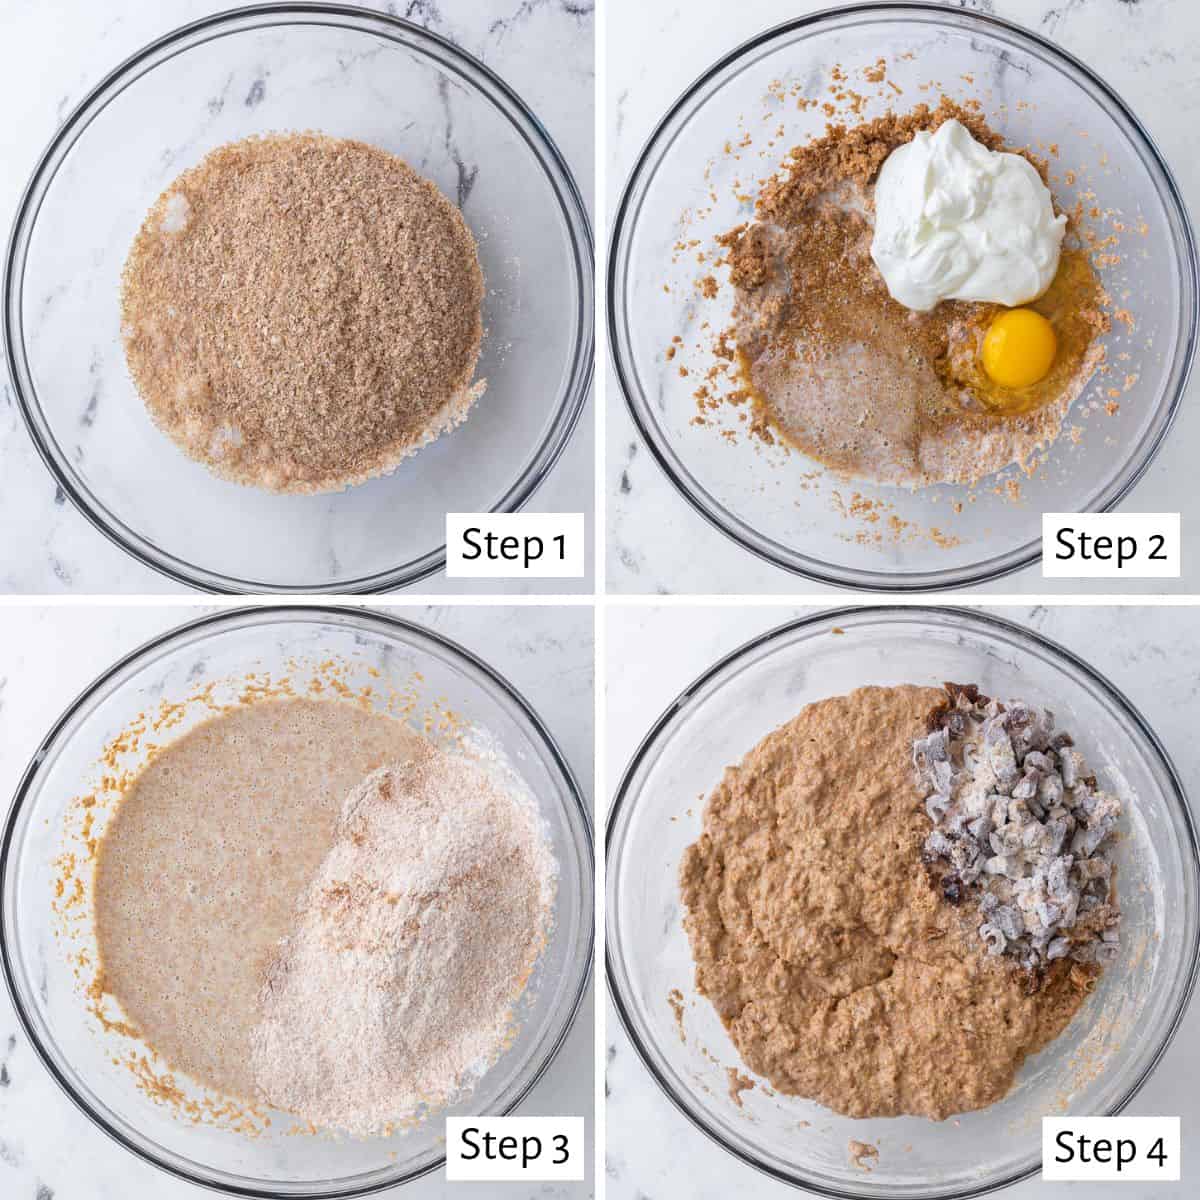 4 image collage making batter: 1- wheat bran and milk in a bowl, 2- yogurt, egg, maple syrup, and vanilla added, 3- dry ingredients added, 4- after combined with flour coated chopped dates added on top.